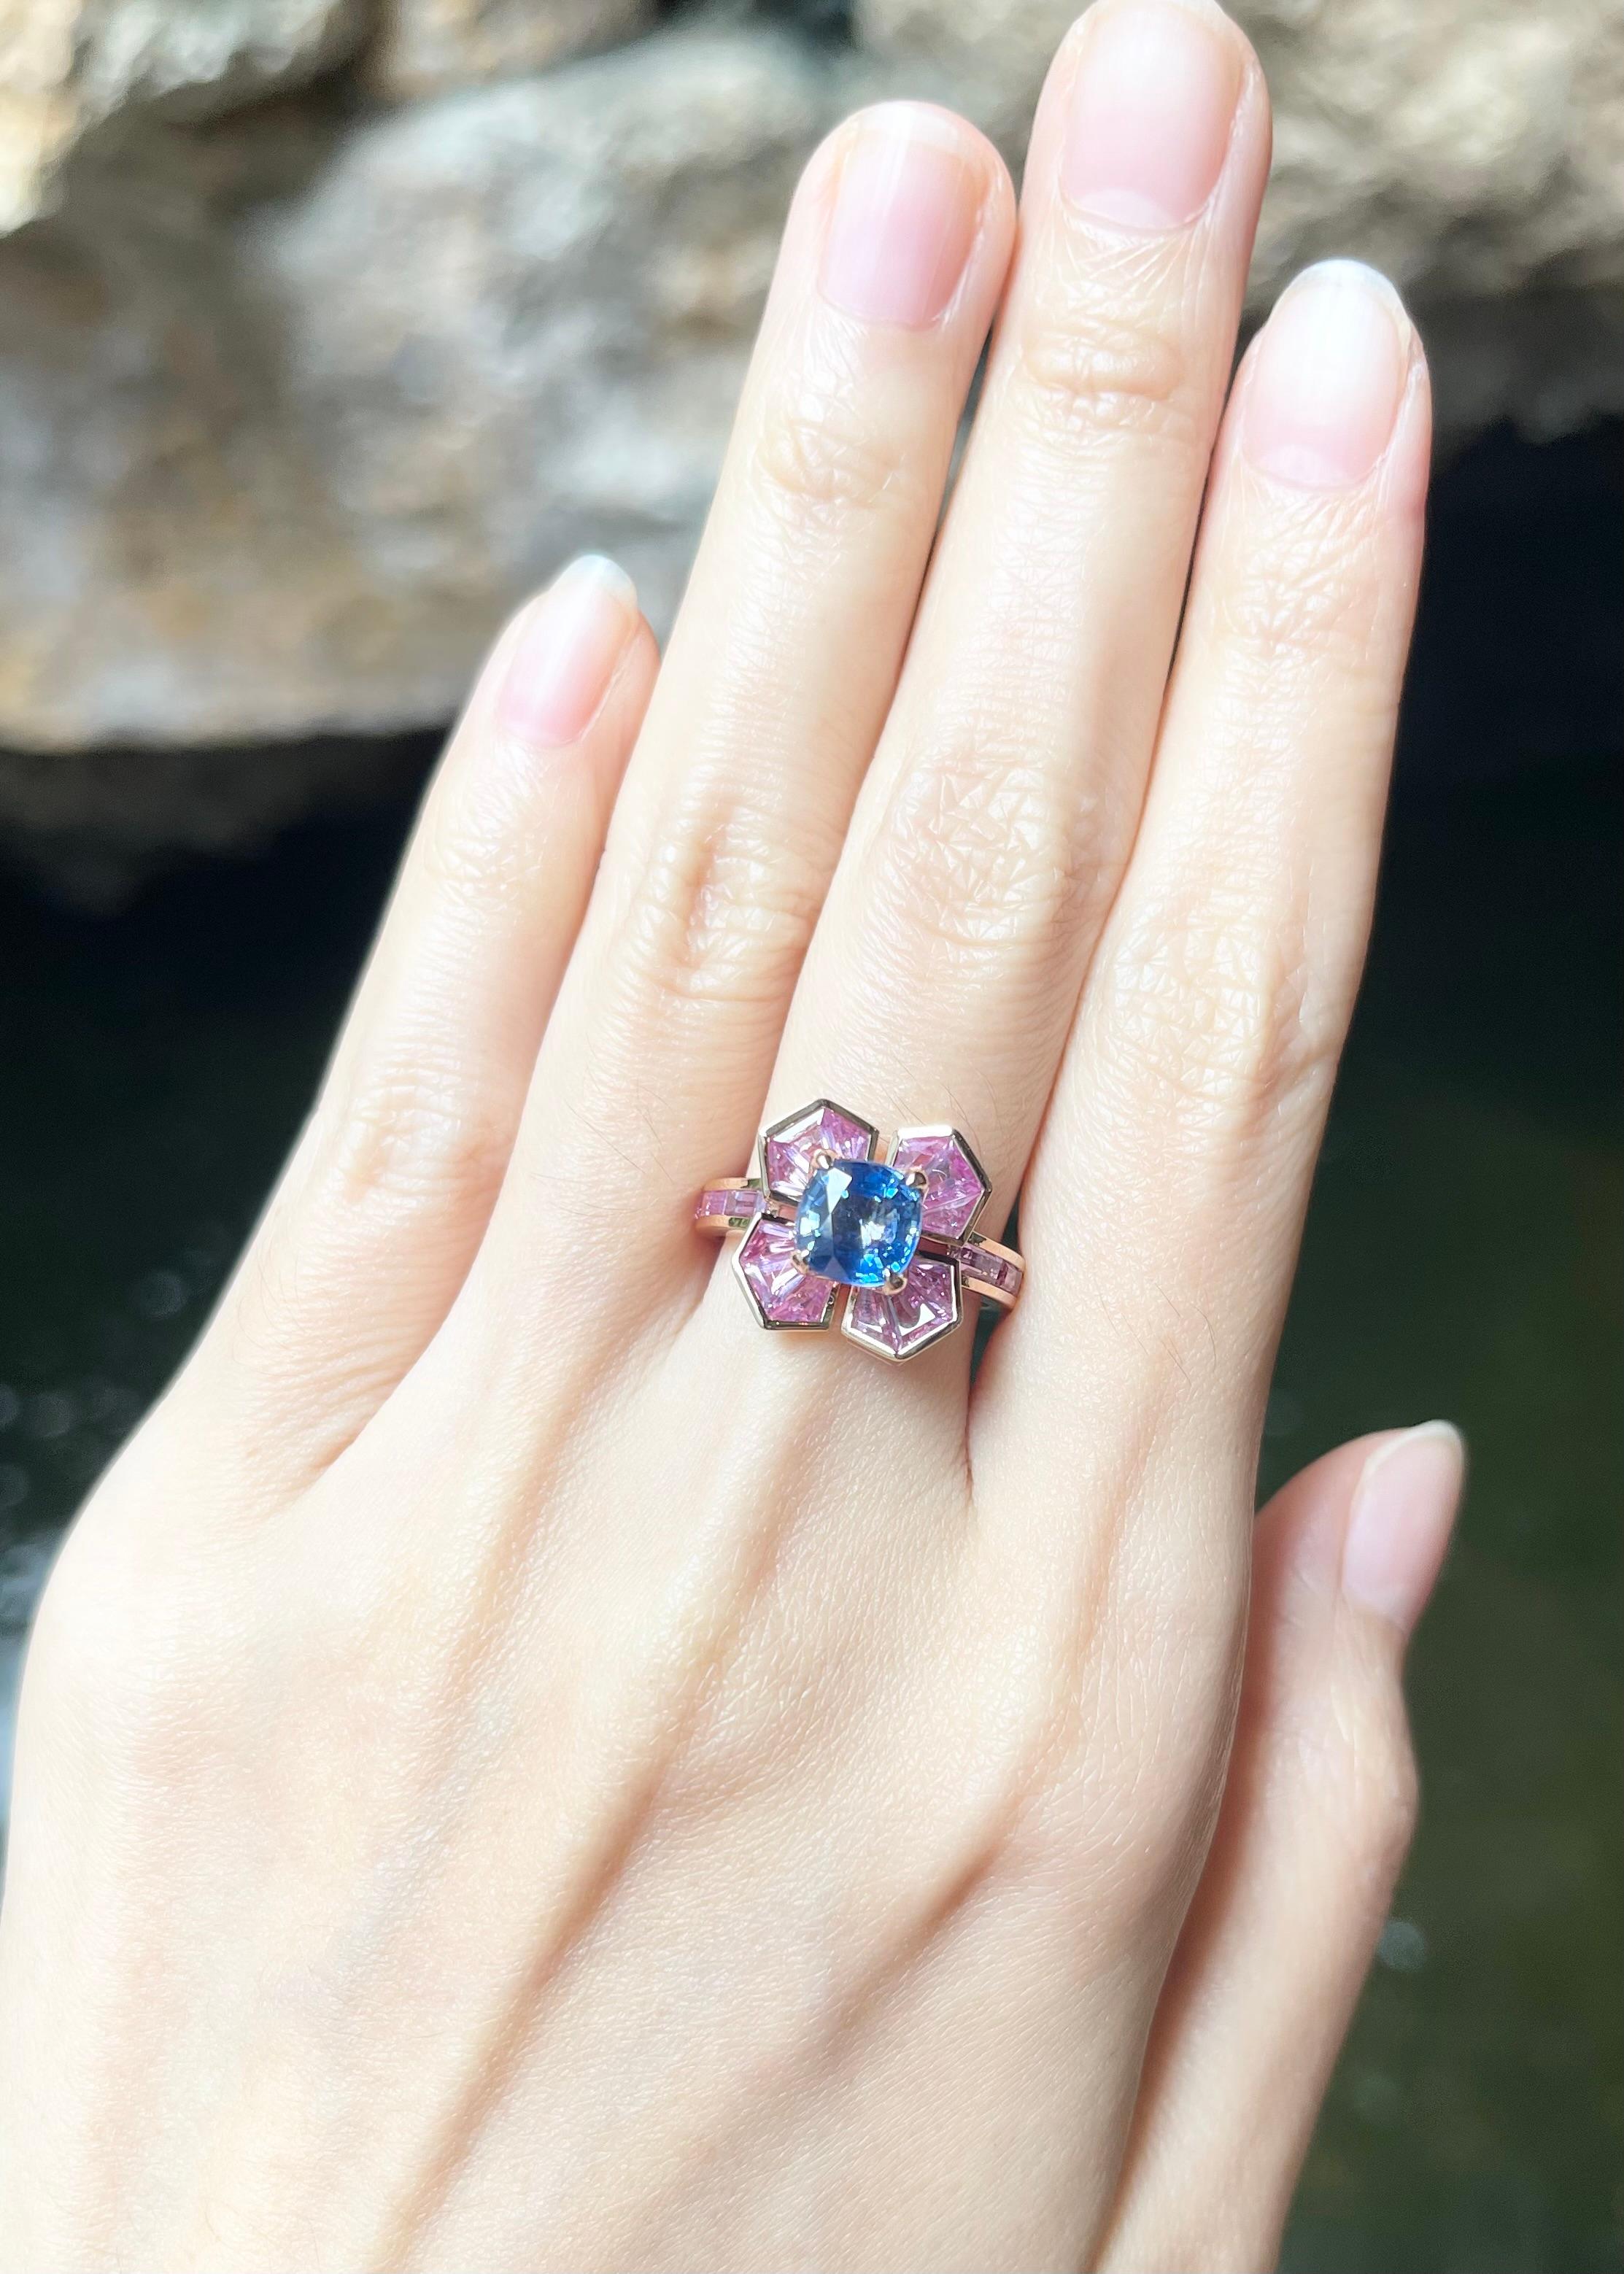 Blue Sapphire 1.97 carats with Pink Sapphire 3.13 carats Ring set in 18K Rose Gold Settings

Width:  1.3 cm 
Length: 1.3 cm
Ring Size: 53
Total Weight: 5.77 grams

Blue Sapphire 
Width:  0.7 cm 
Length: 0.7 cm

